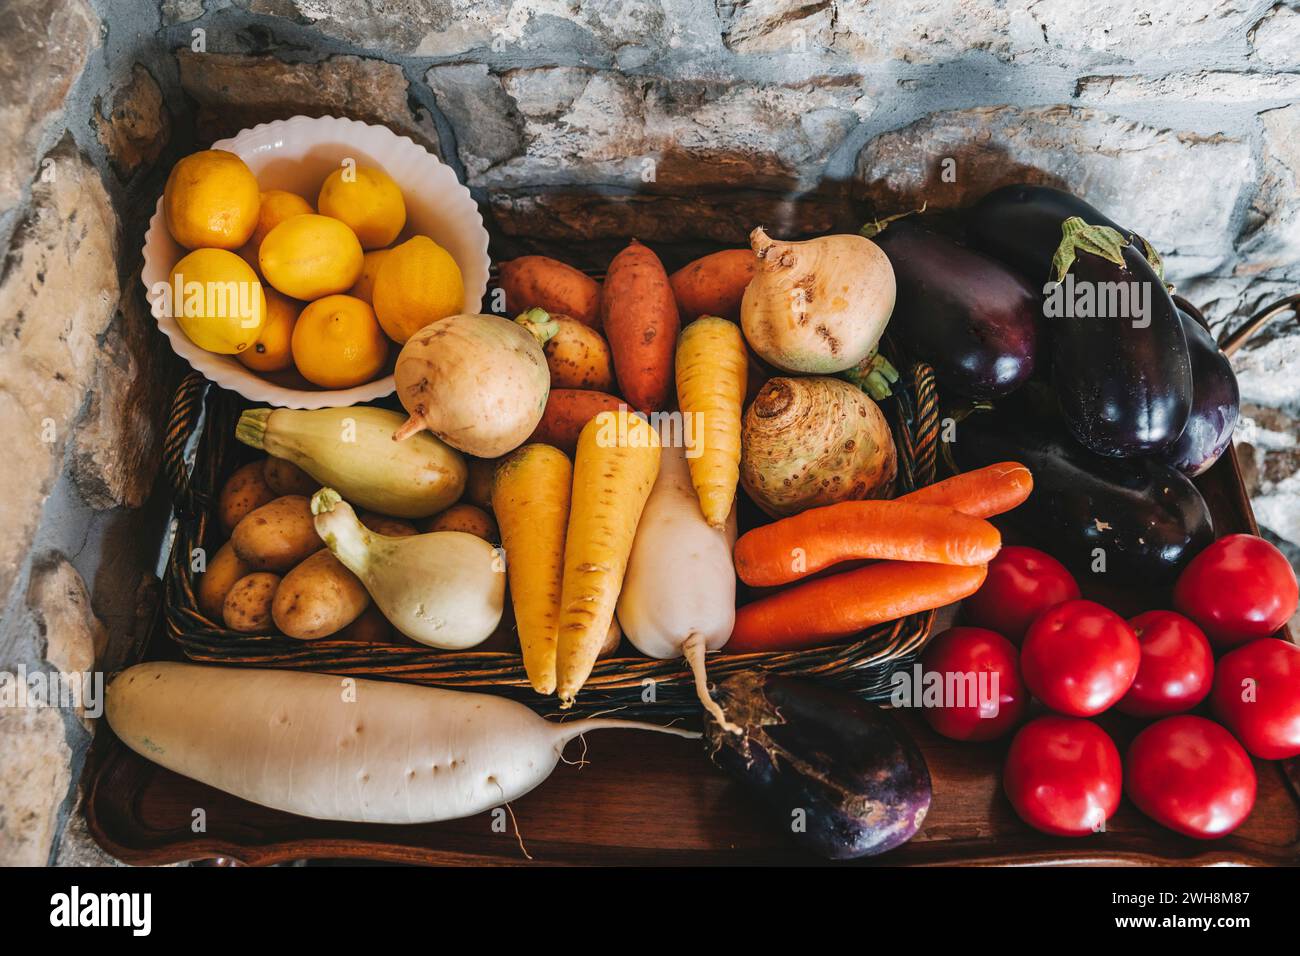 Fresh fruit and vegetables displayed on a wooden surface Stock Photo